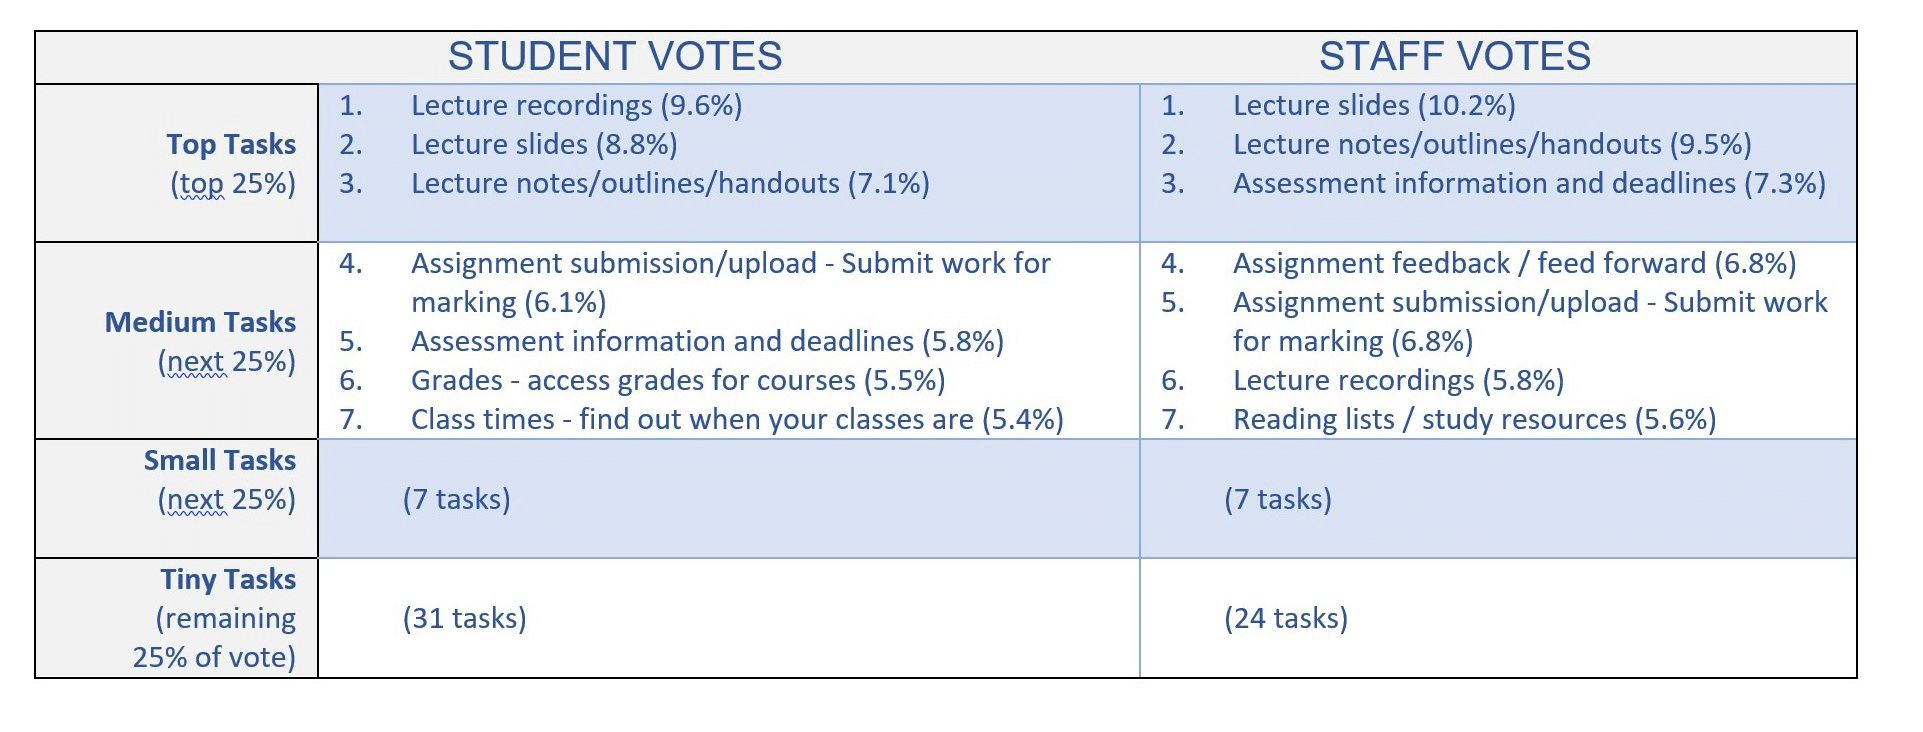 Comparison table of Top Tasks for Staff Vs Students